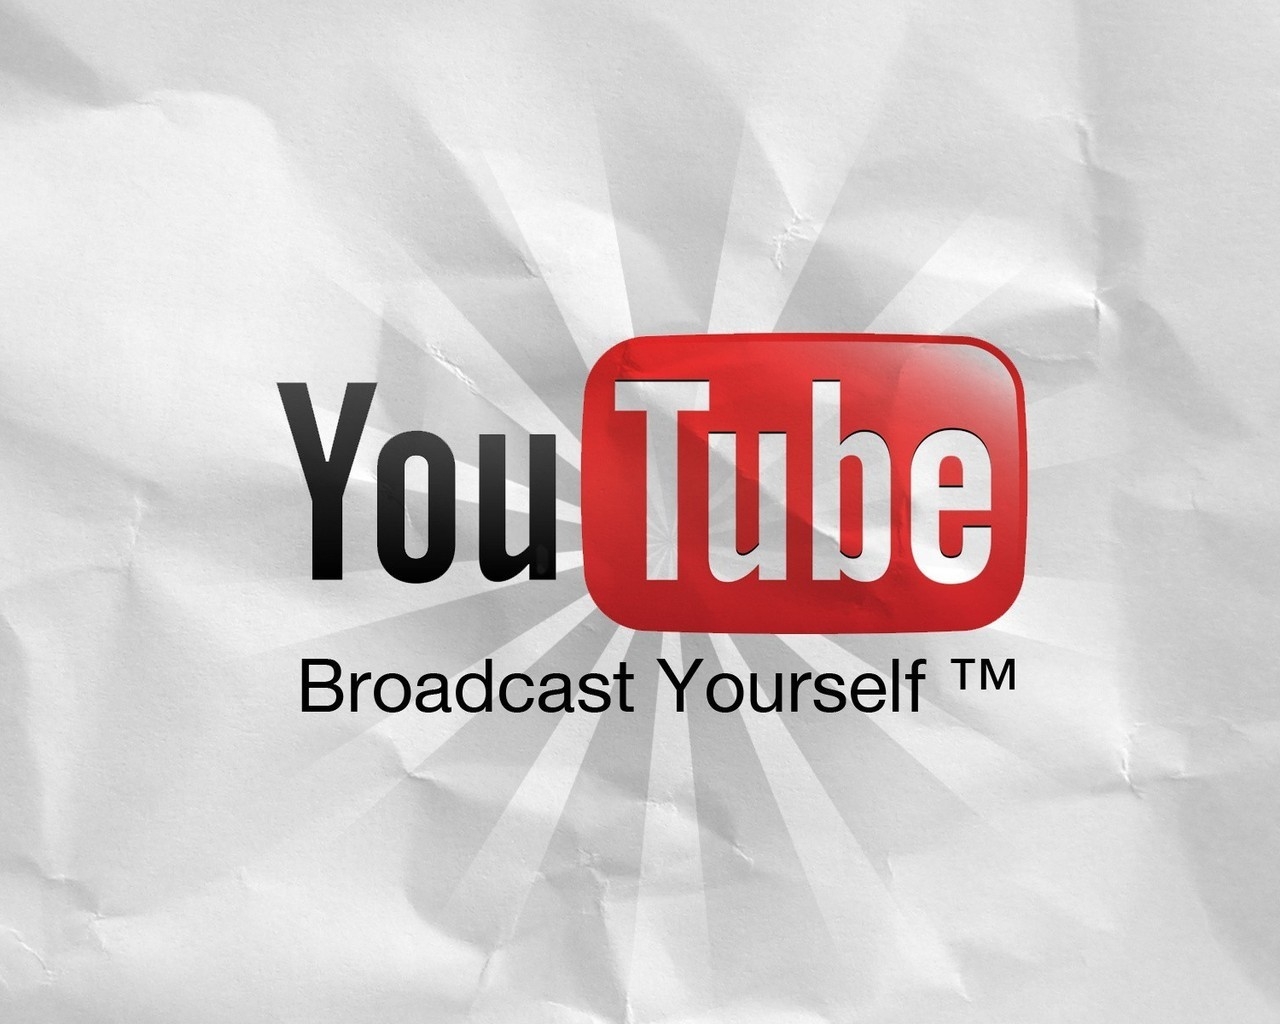 YouTube for 1280 x 1024 resolution